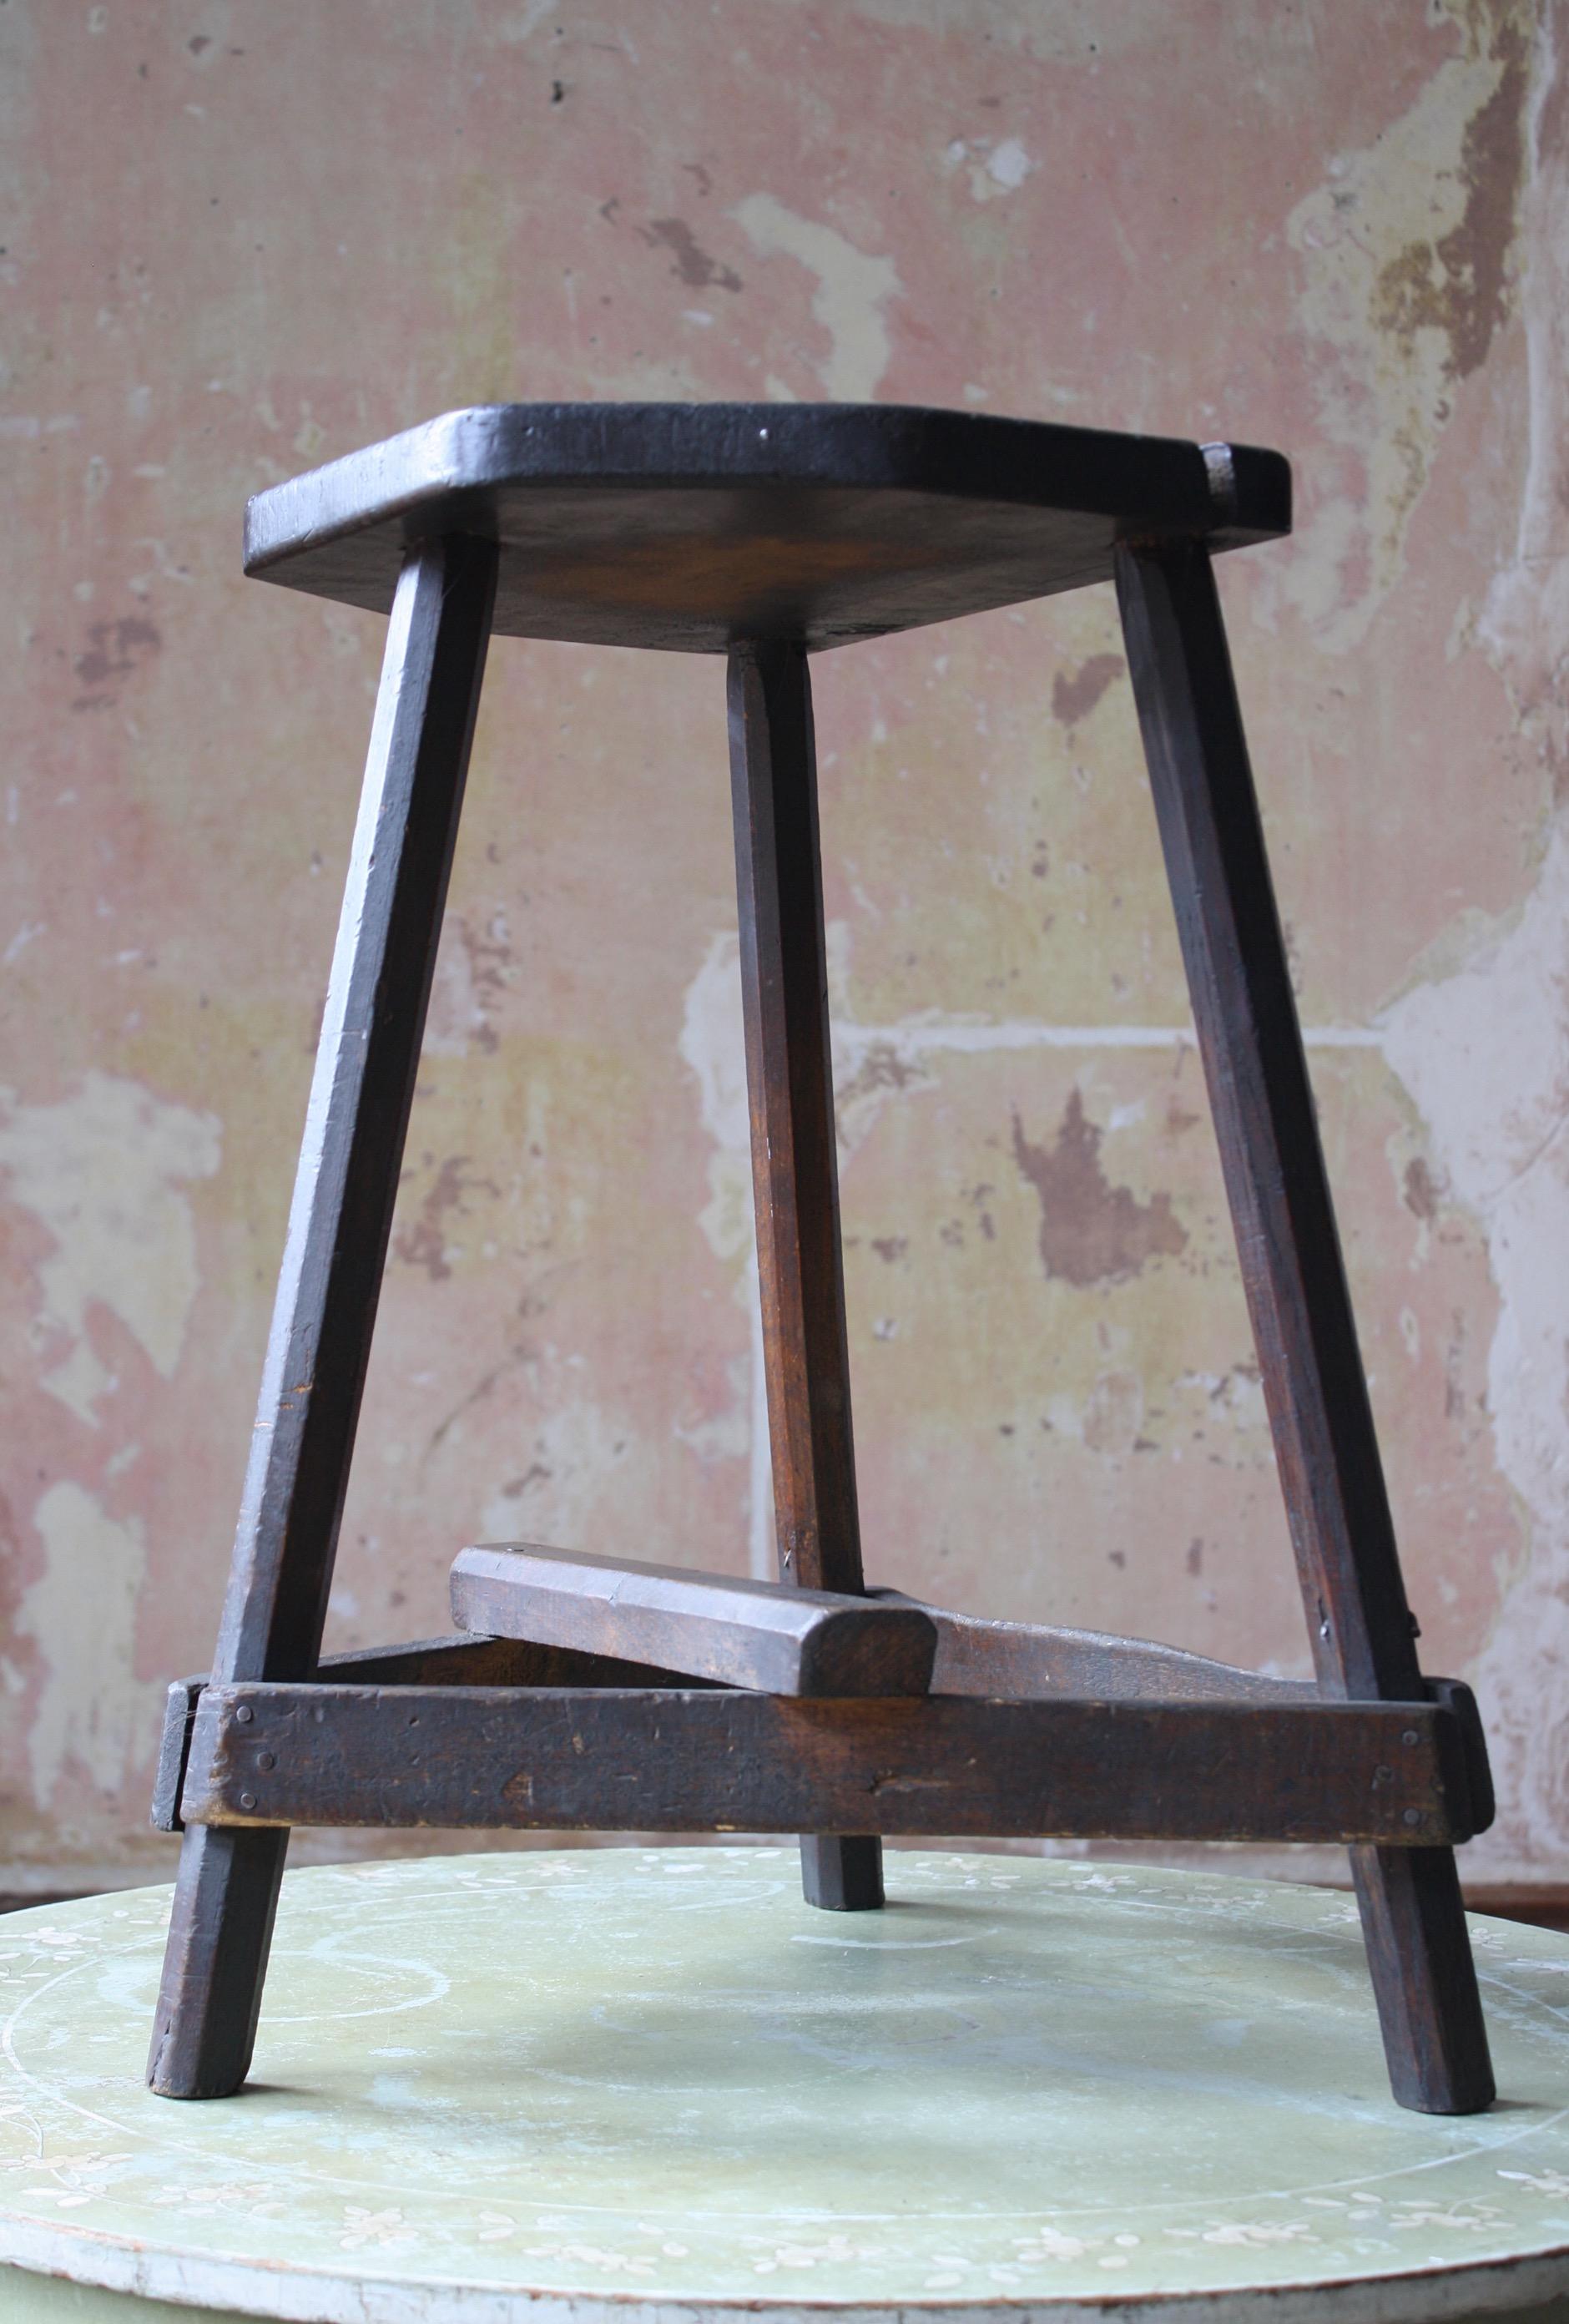 A perfectly worn and better than your average cricket stool, with chamfered legs, a thick seat and planked supports. 

Lots of period repairs, marks and abrasions. The stool is perfectly sturdy and is very much still fit for purpose, with a